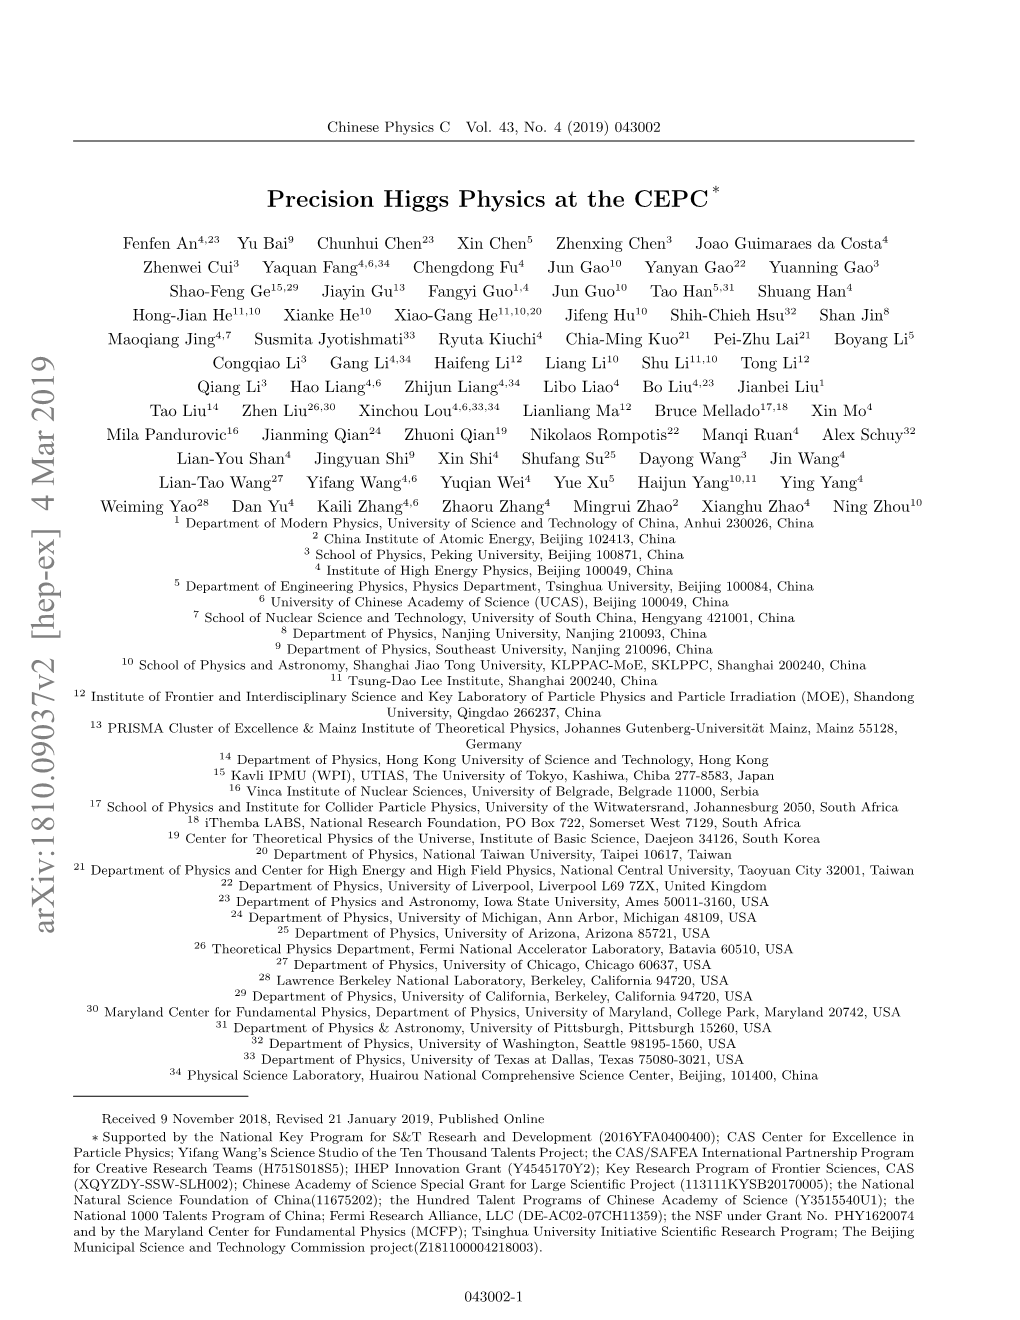 Cepc Higgs Couplings Prospects